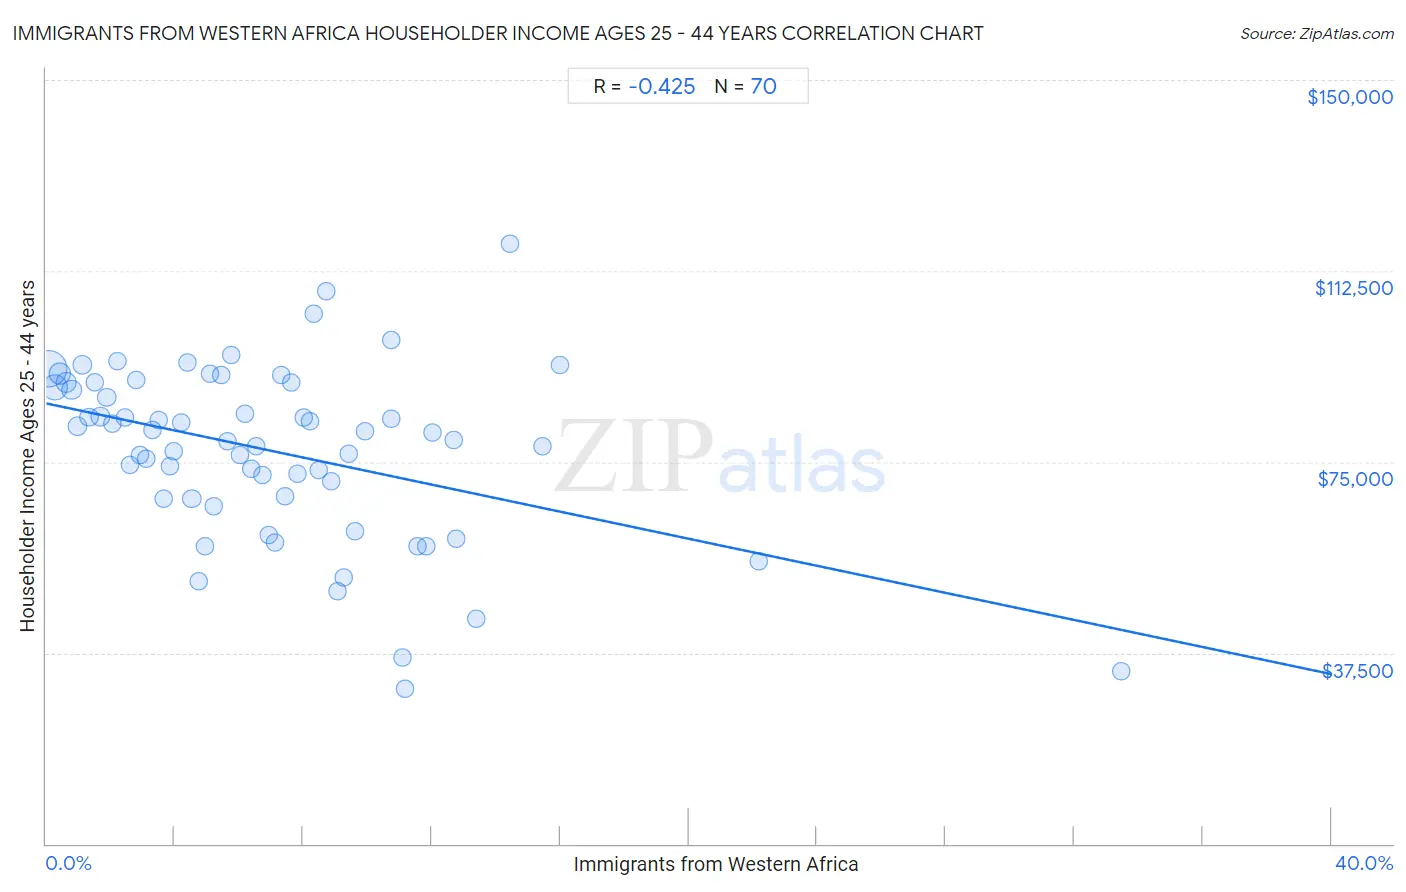 Immigrants from Western Africa Householder Income Ages 25 - 44 years